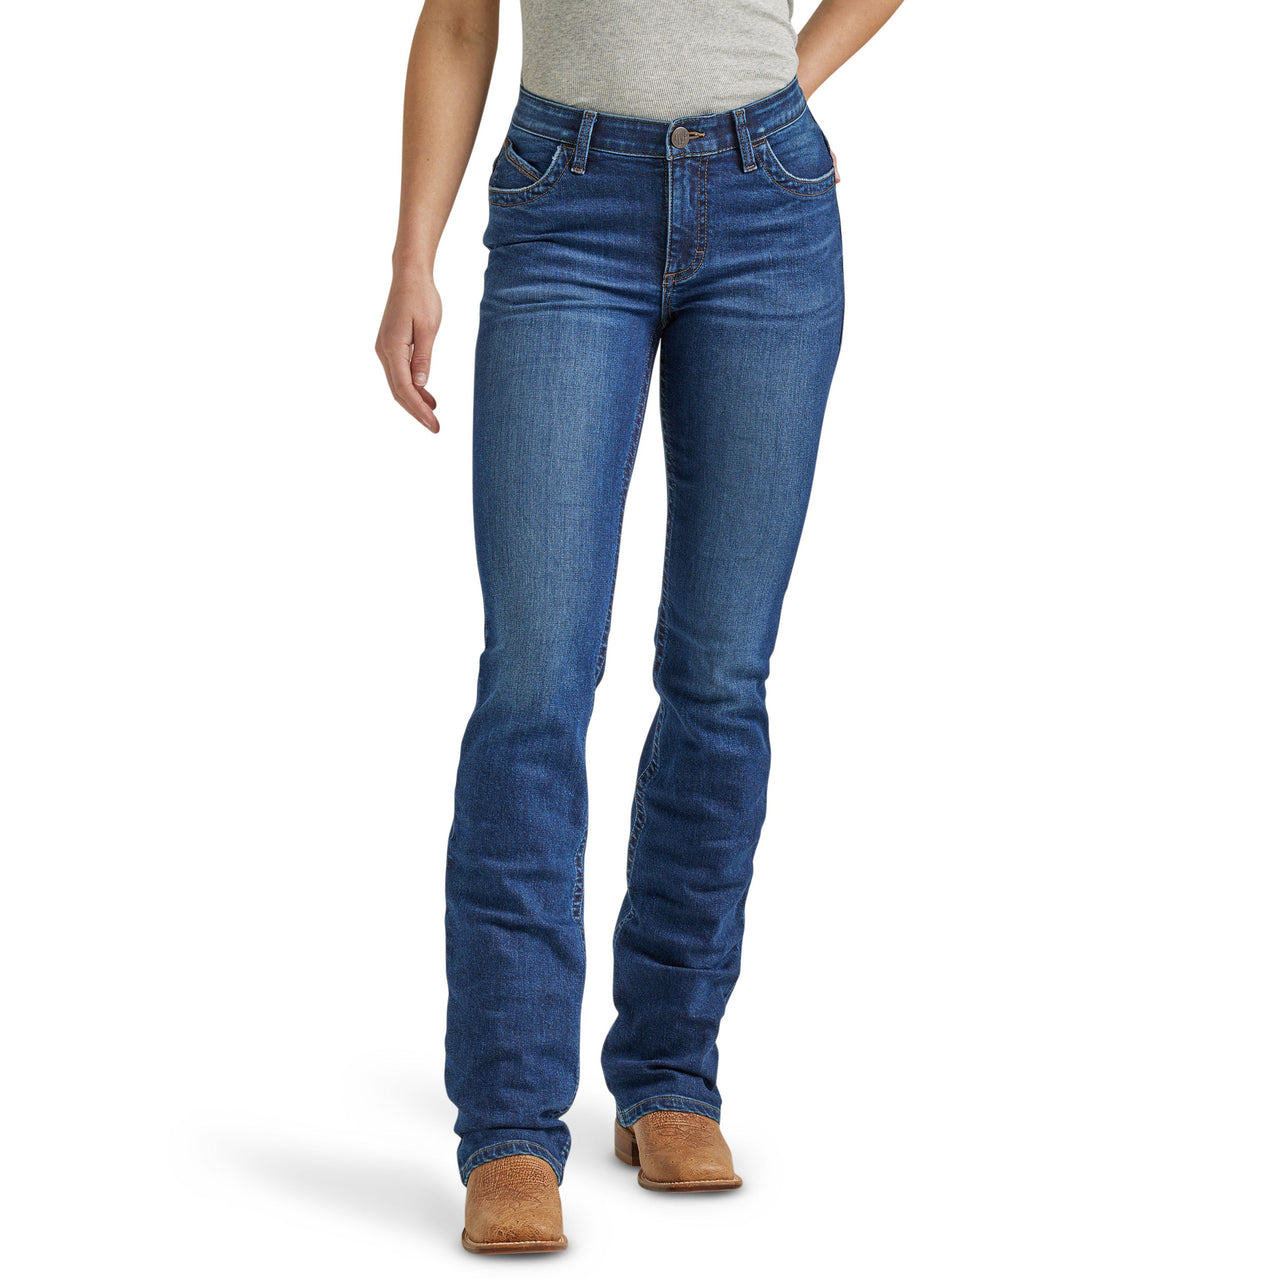 Wrangler Women's Ultimate Riding Willow Mid Rise Bootcut Jeans - Hailey